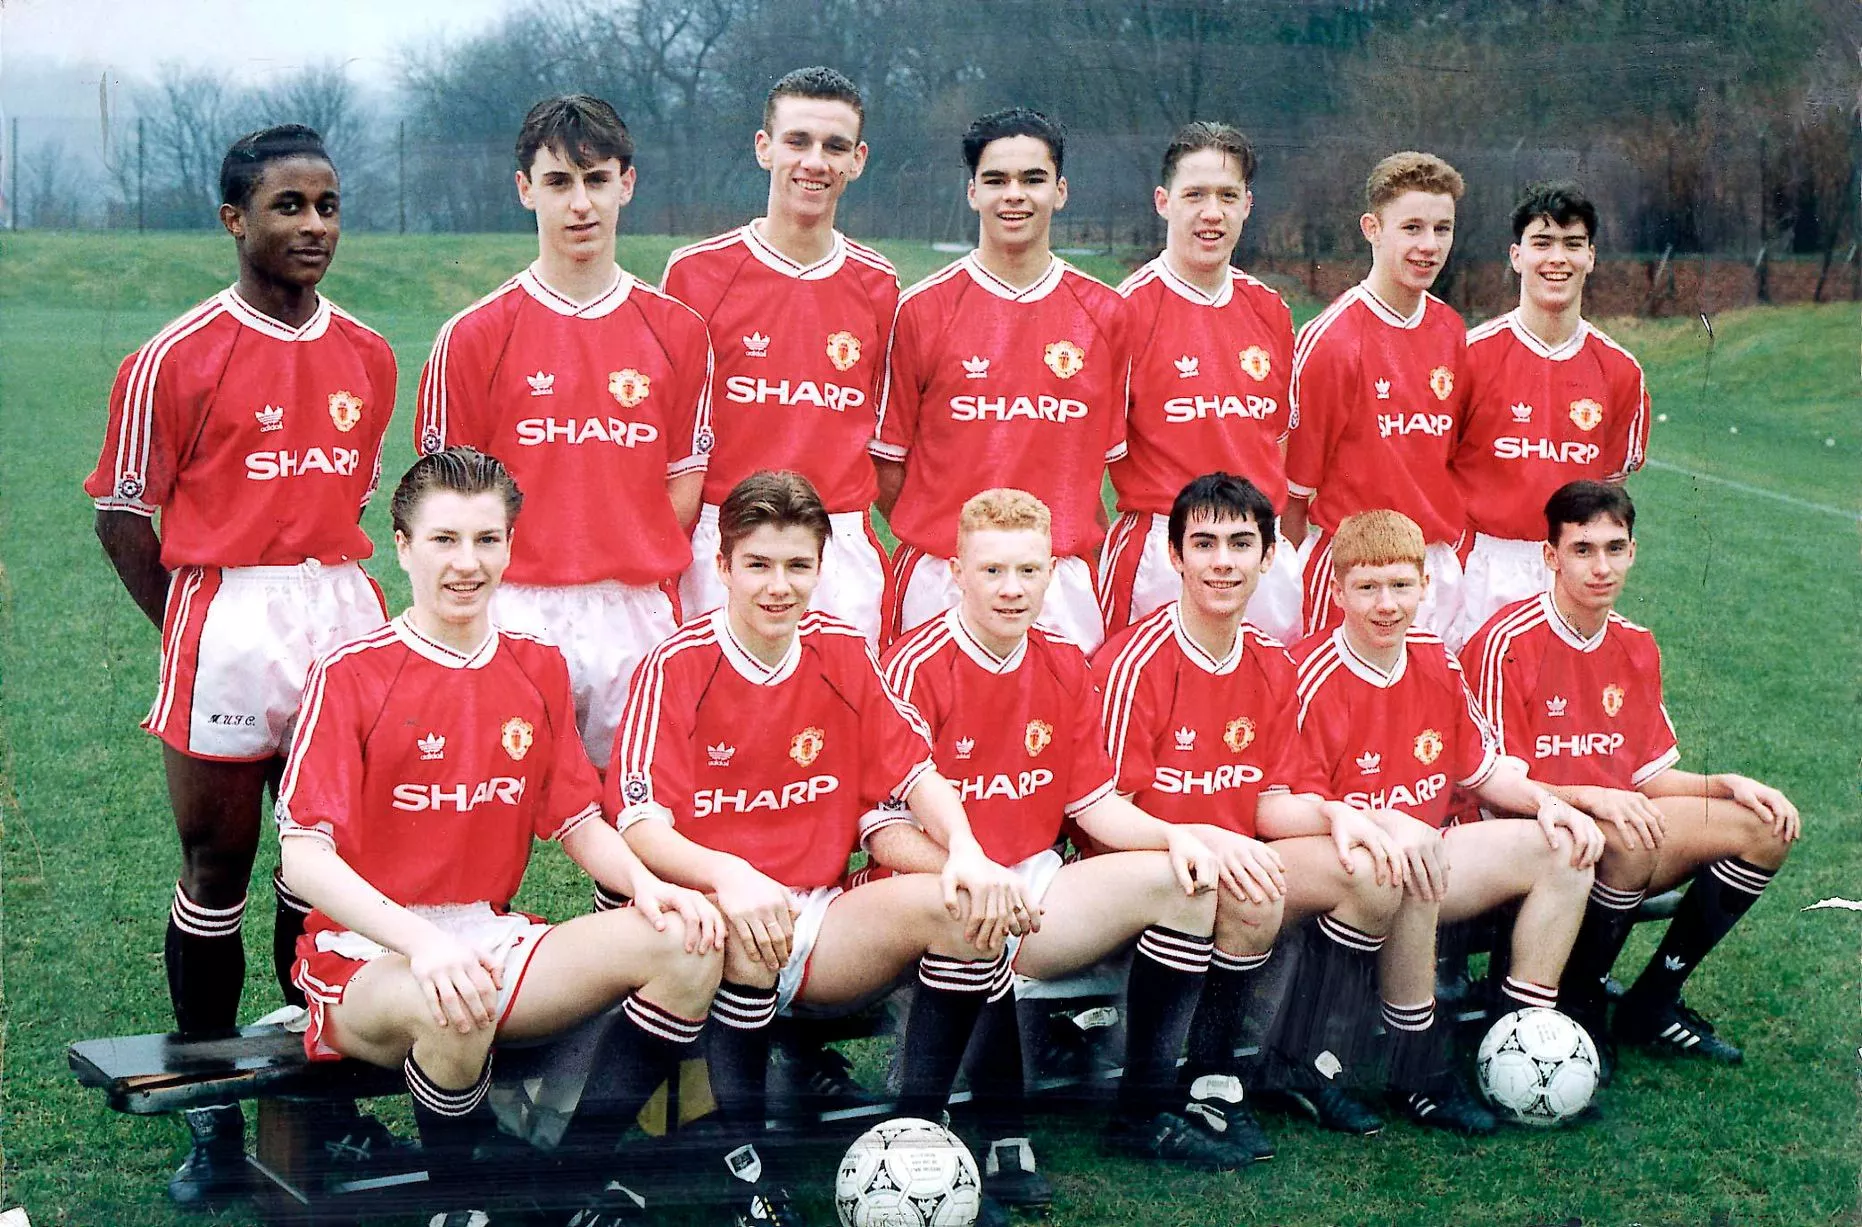 MANCHESTER%20UNITED%20YOUTH%20TEAM%201992.jpg